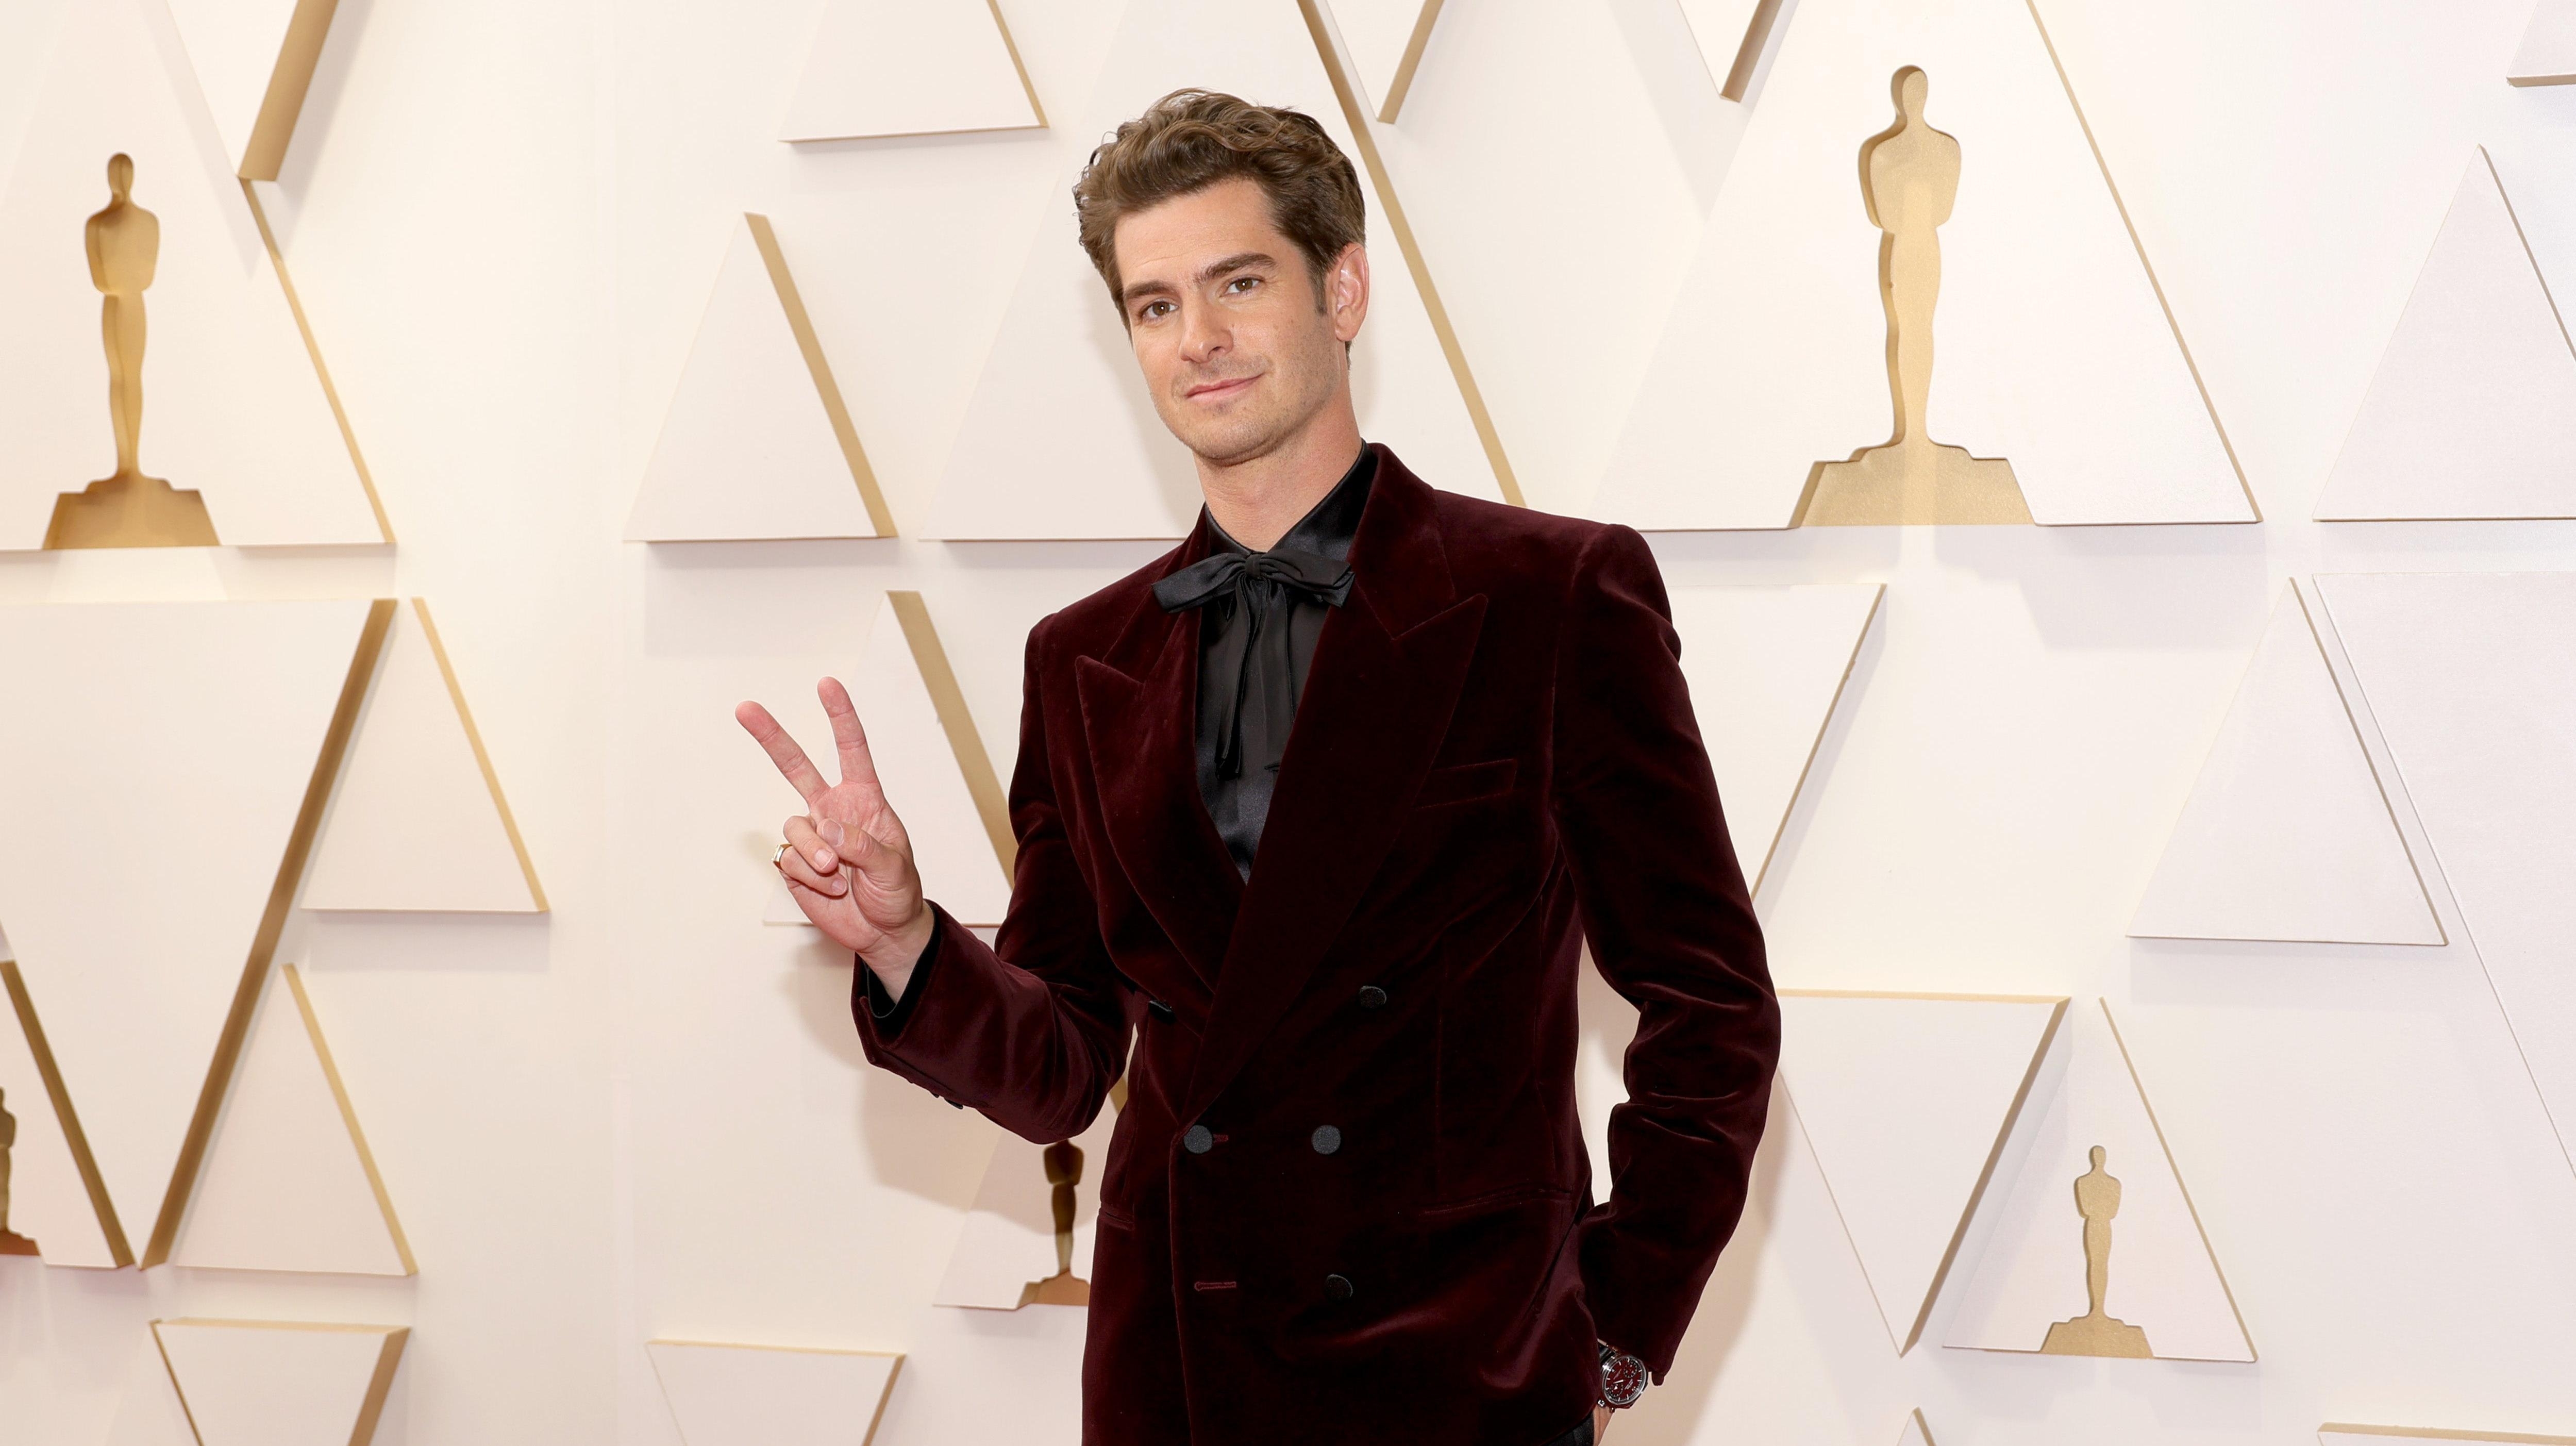 Andrew Garfield wants to take a break and “be a bit ordinary for a while”